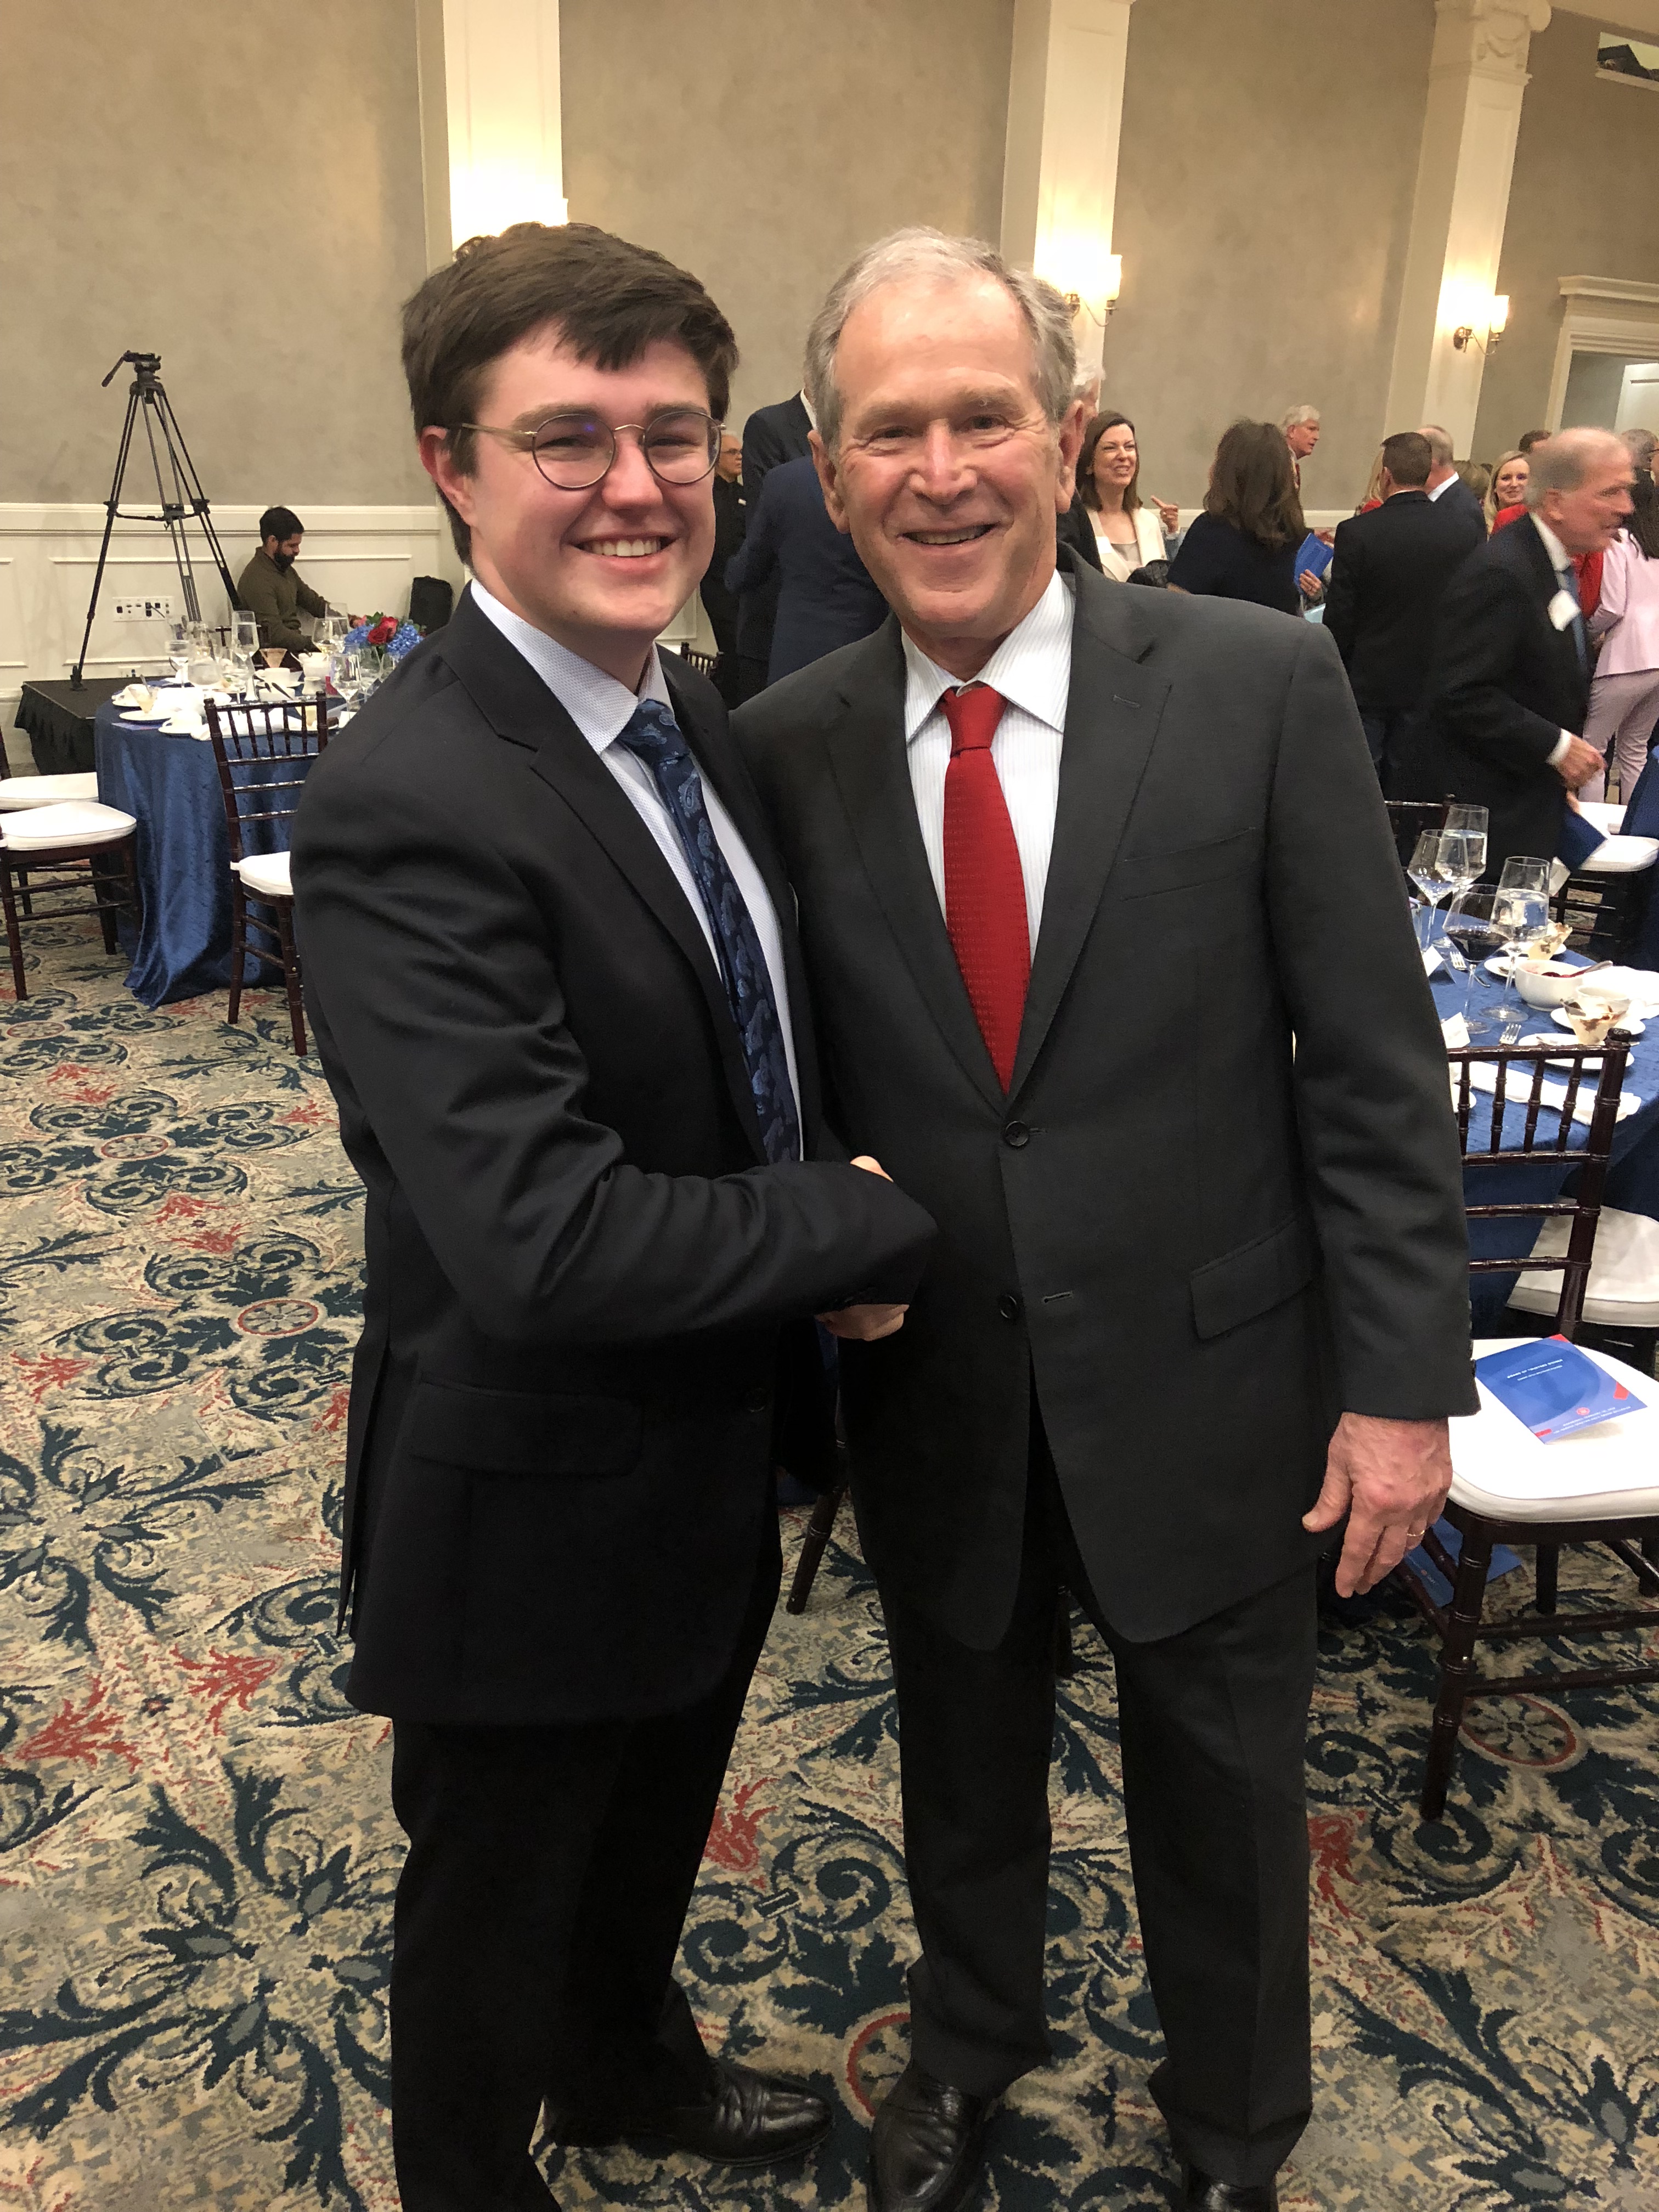 Bradley Potts is a white man with short dark brown hair. He is wearing a black business suit with a navy blue tie. He is shaking the hand of former President George W. Bush, Jr.